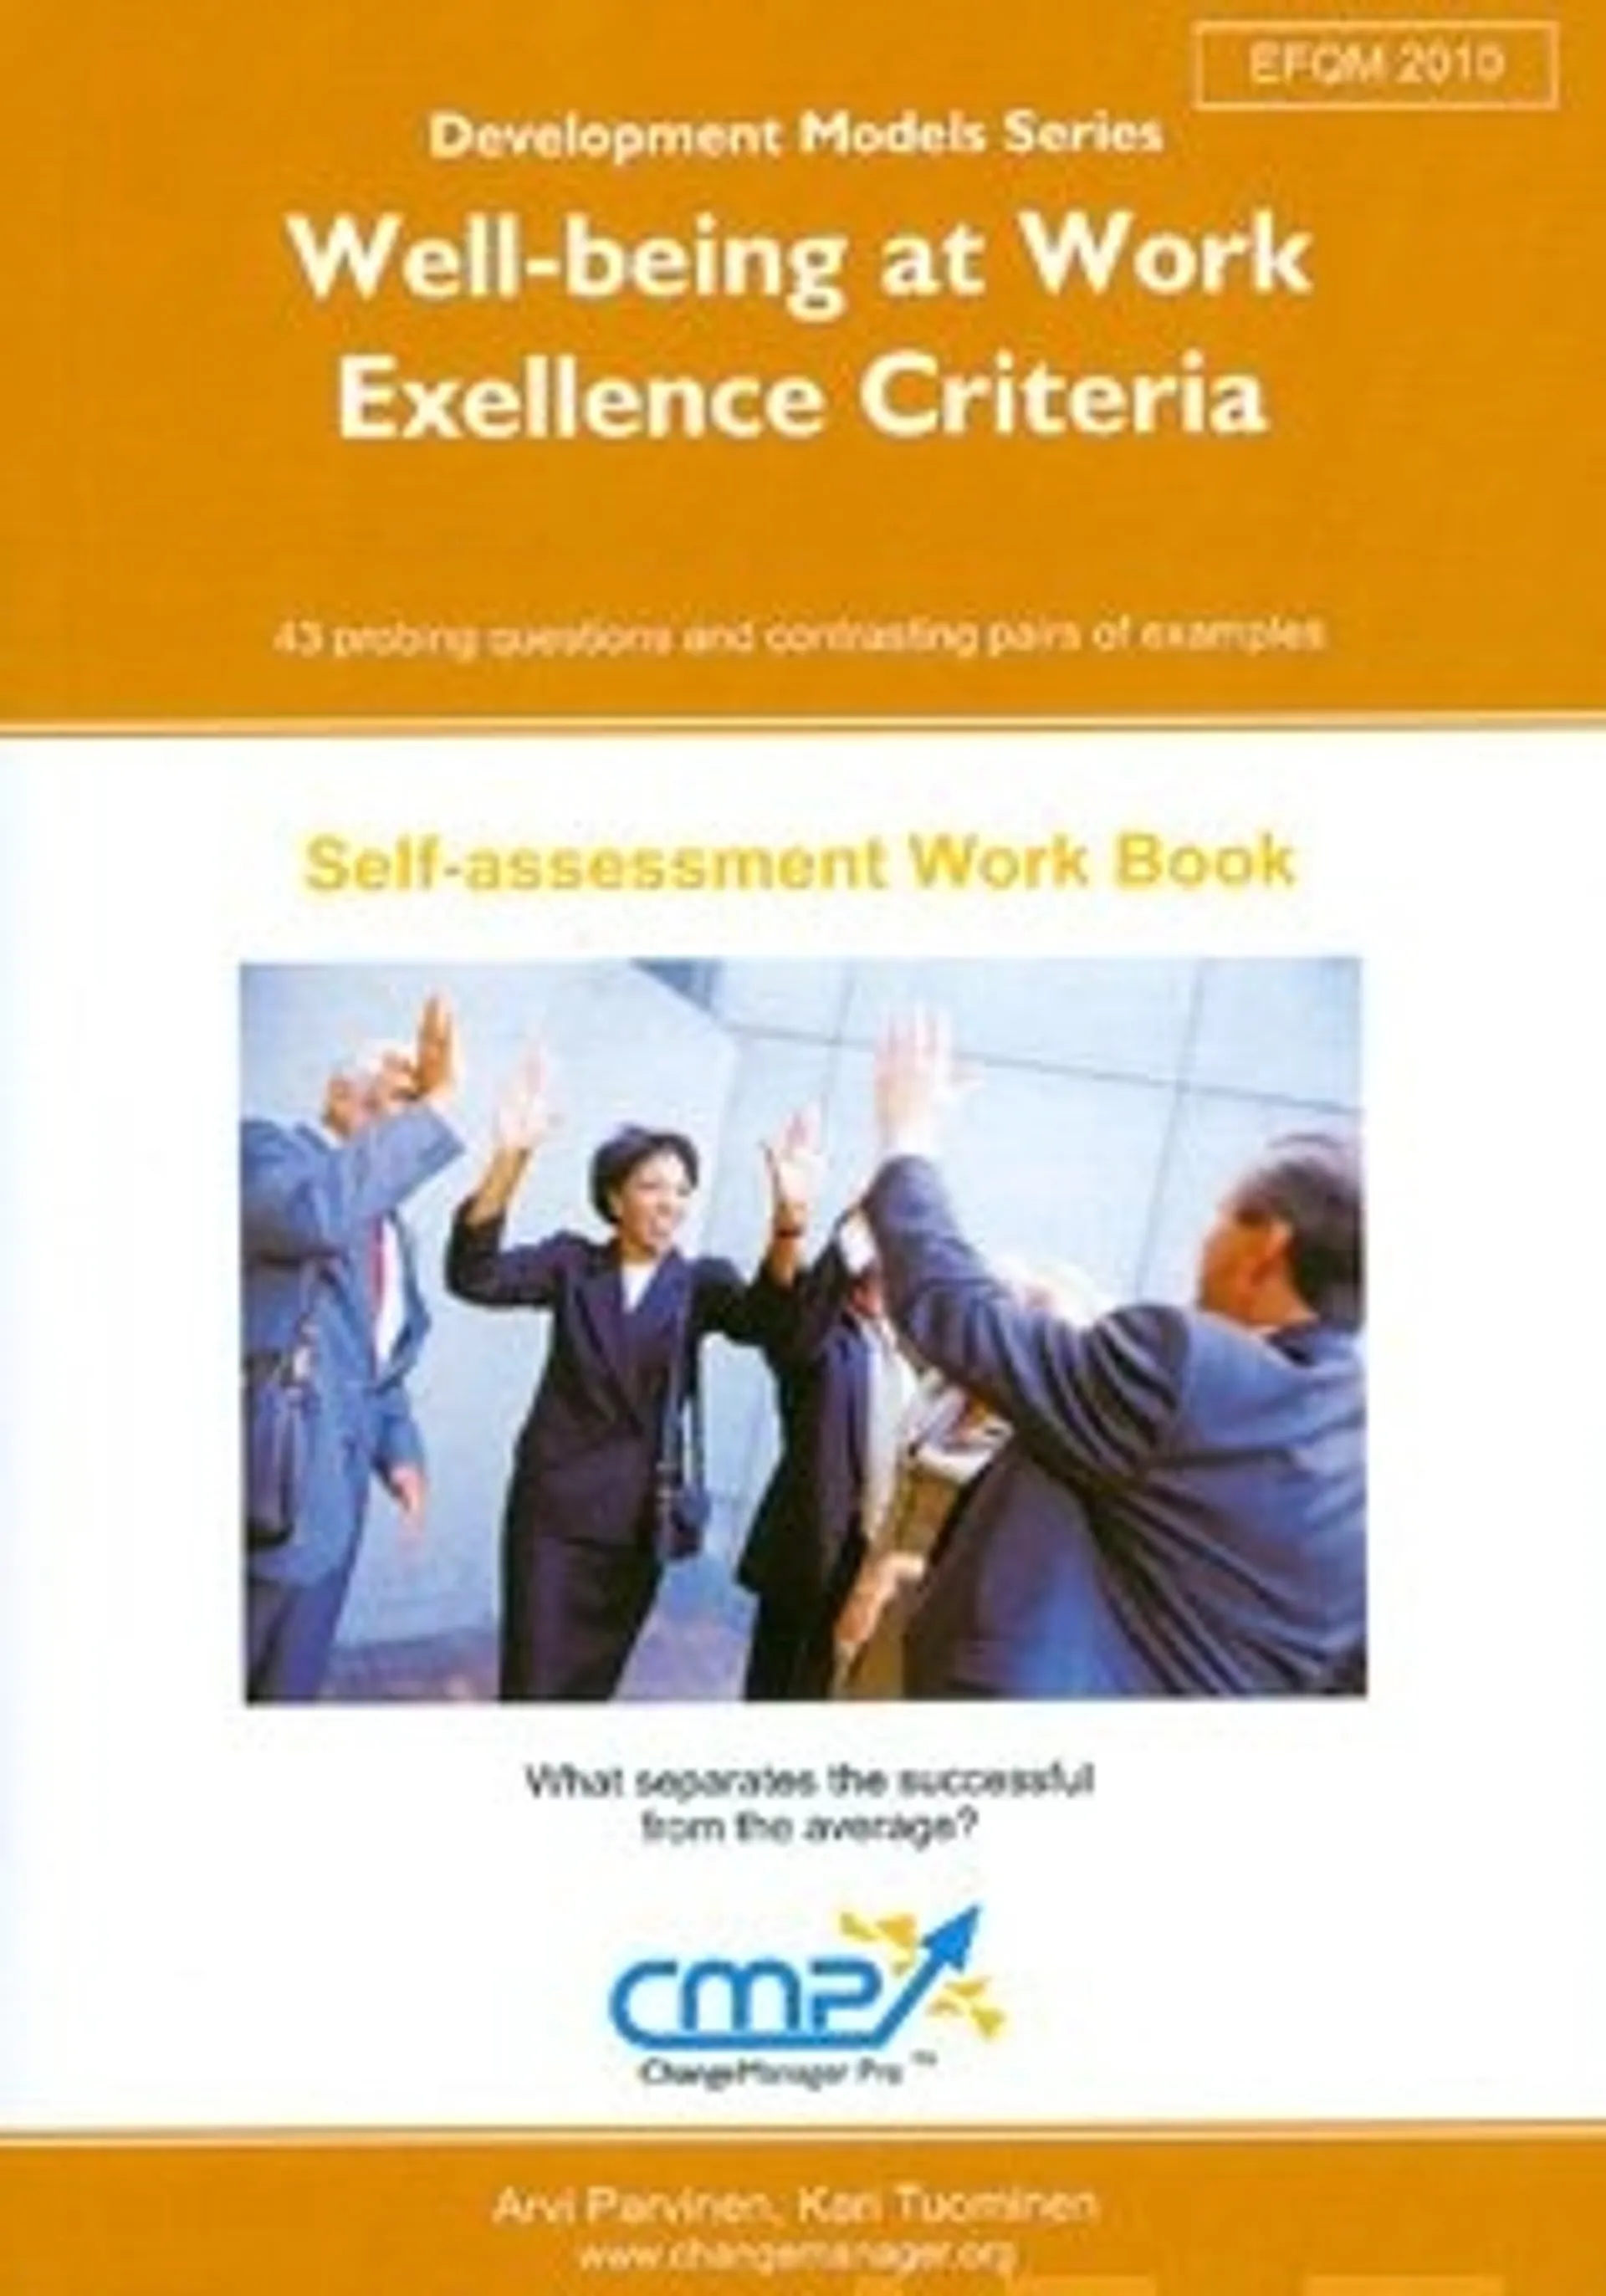 Well-being at Work - Excellence Criteria - EFQM 2010